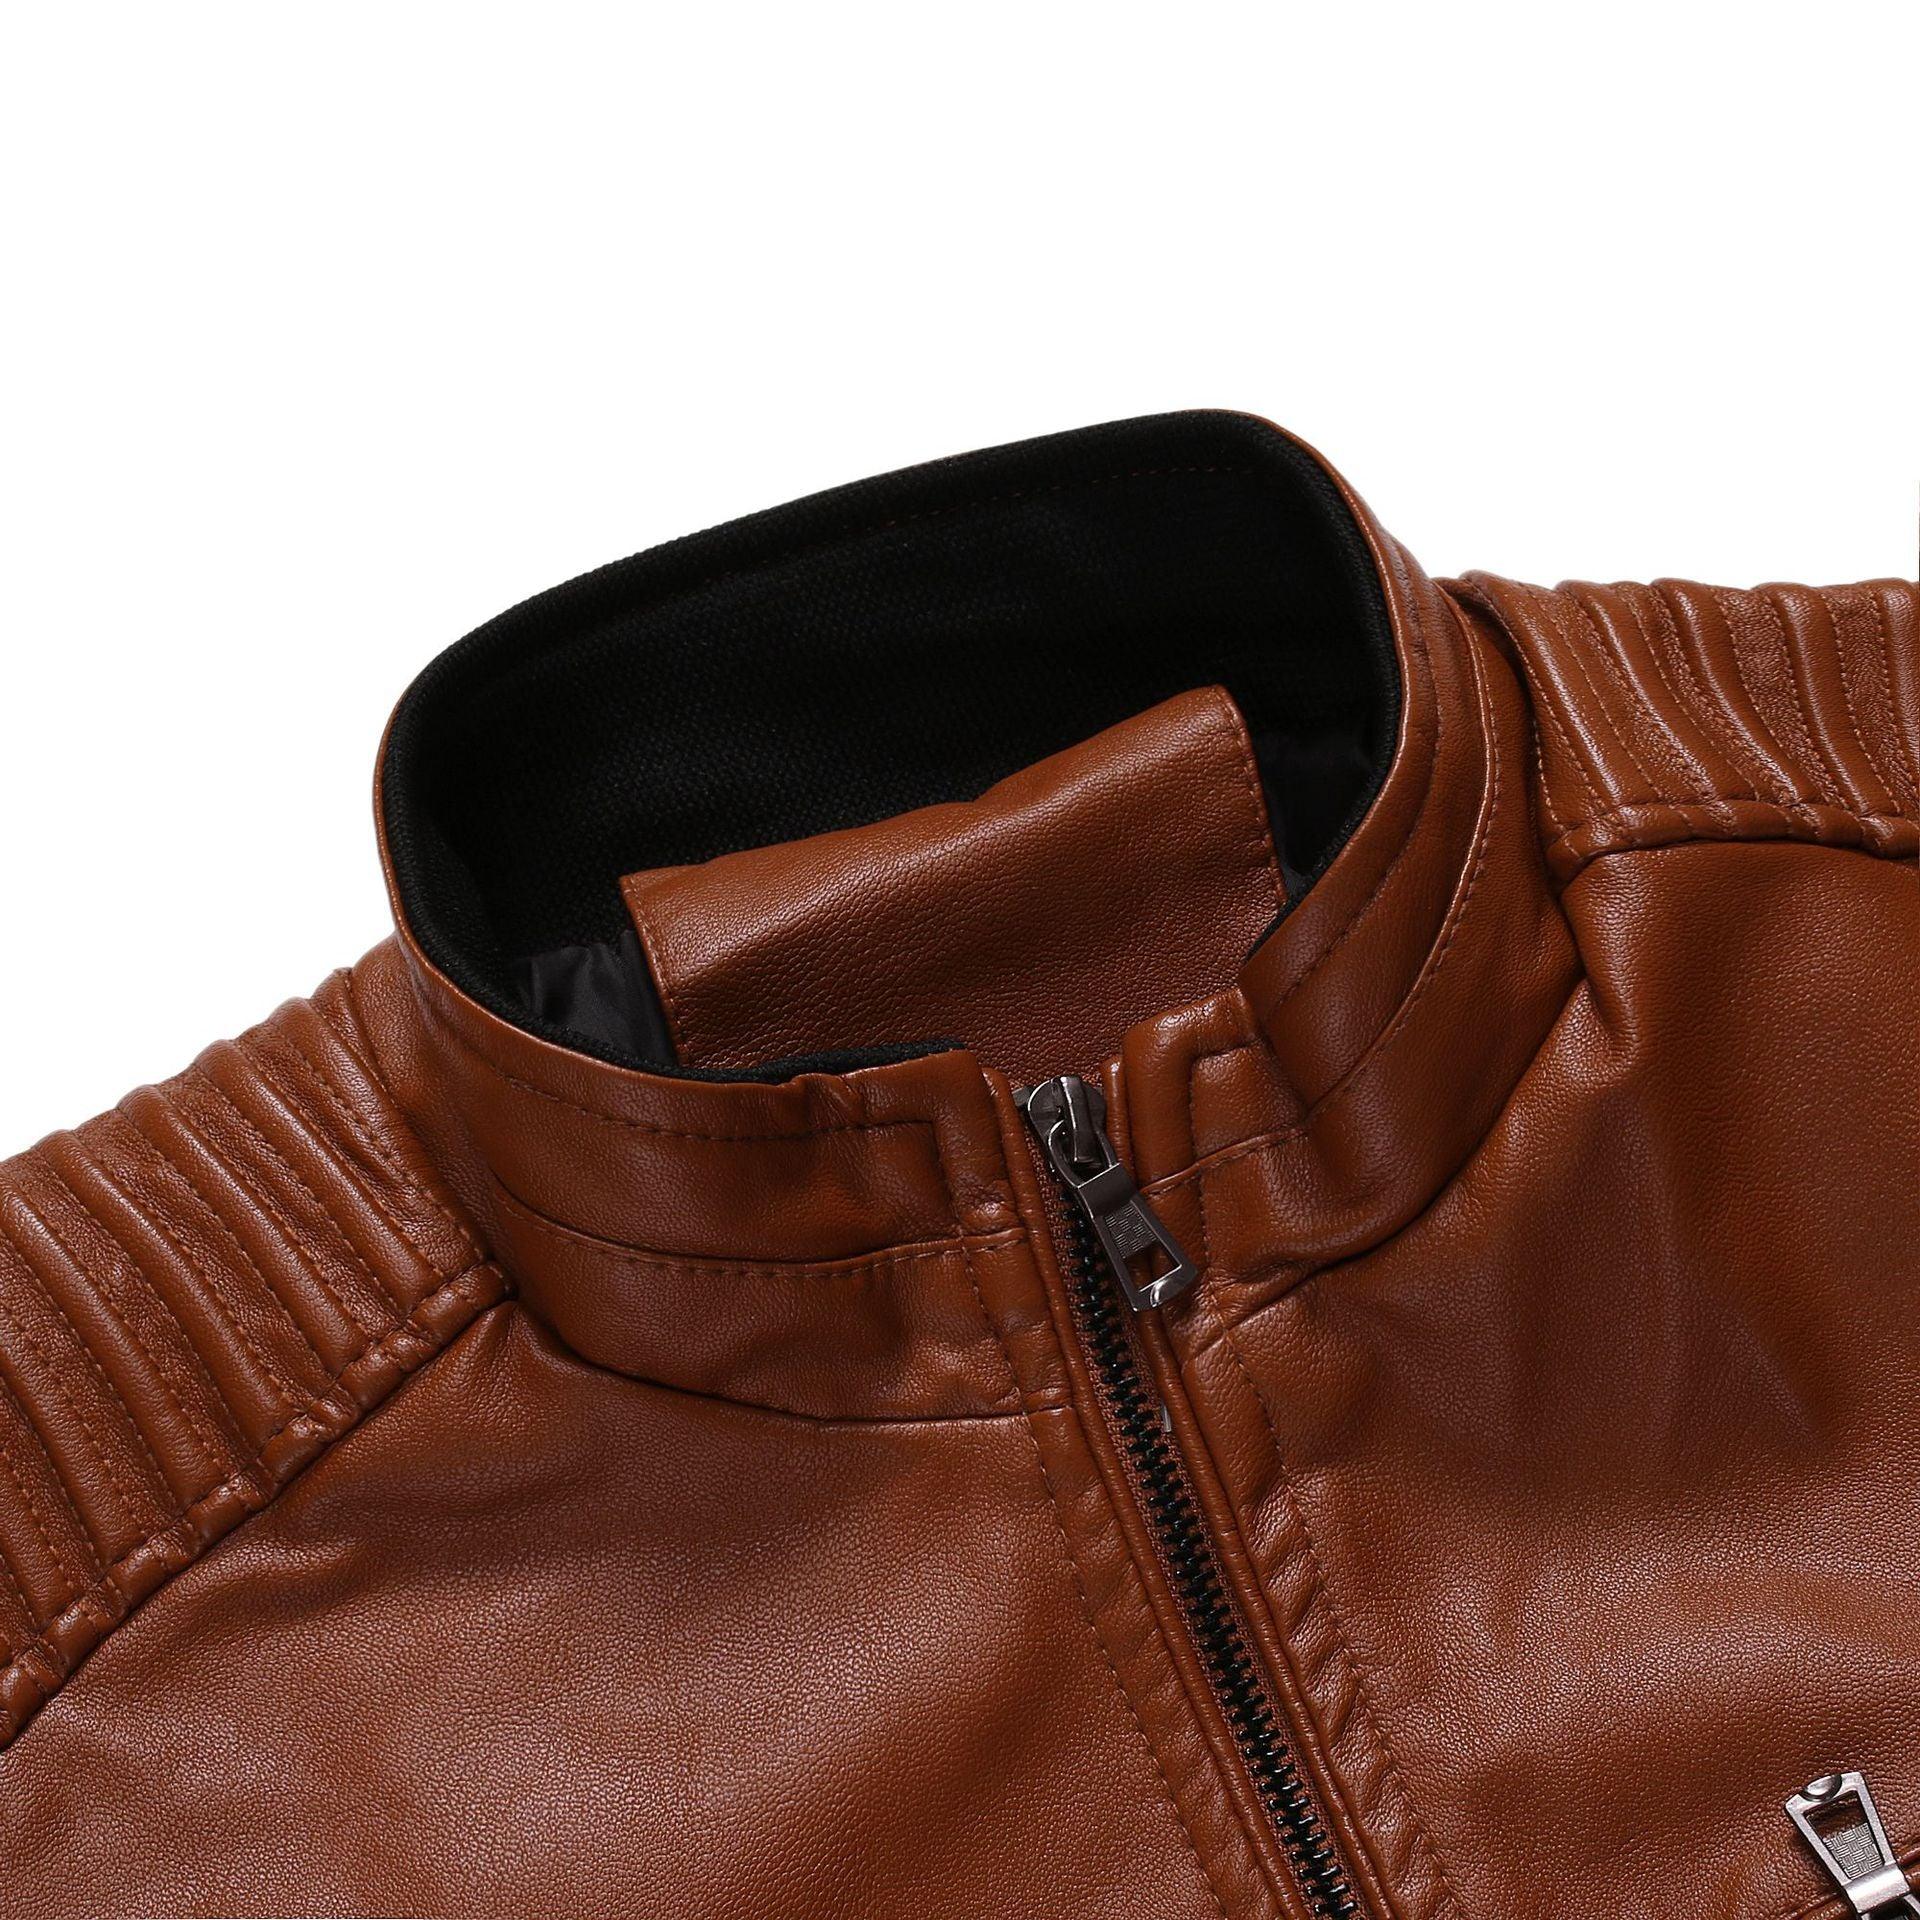 Stand collar motorcycle leather